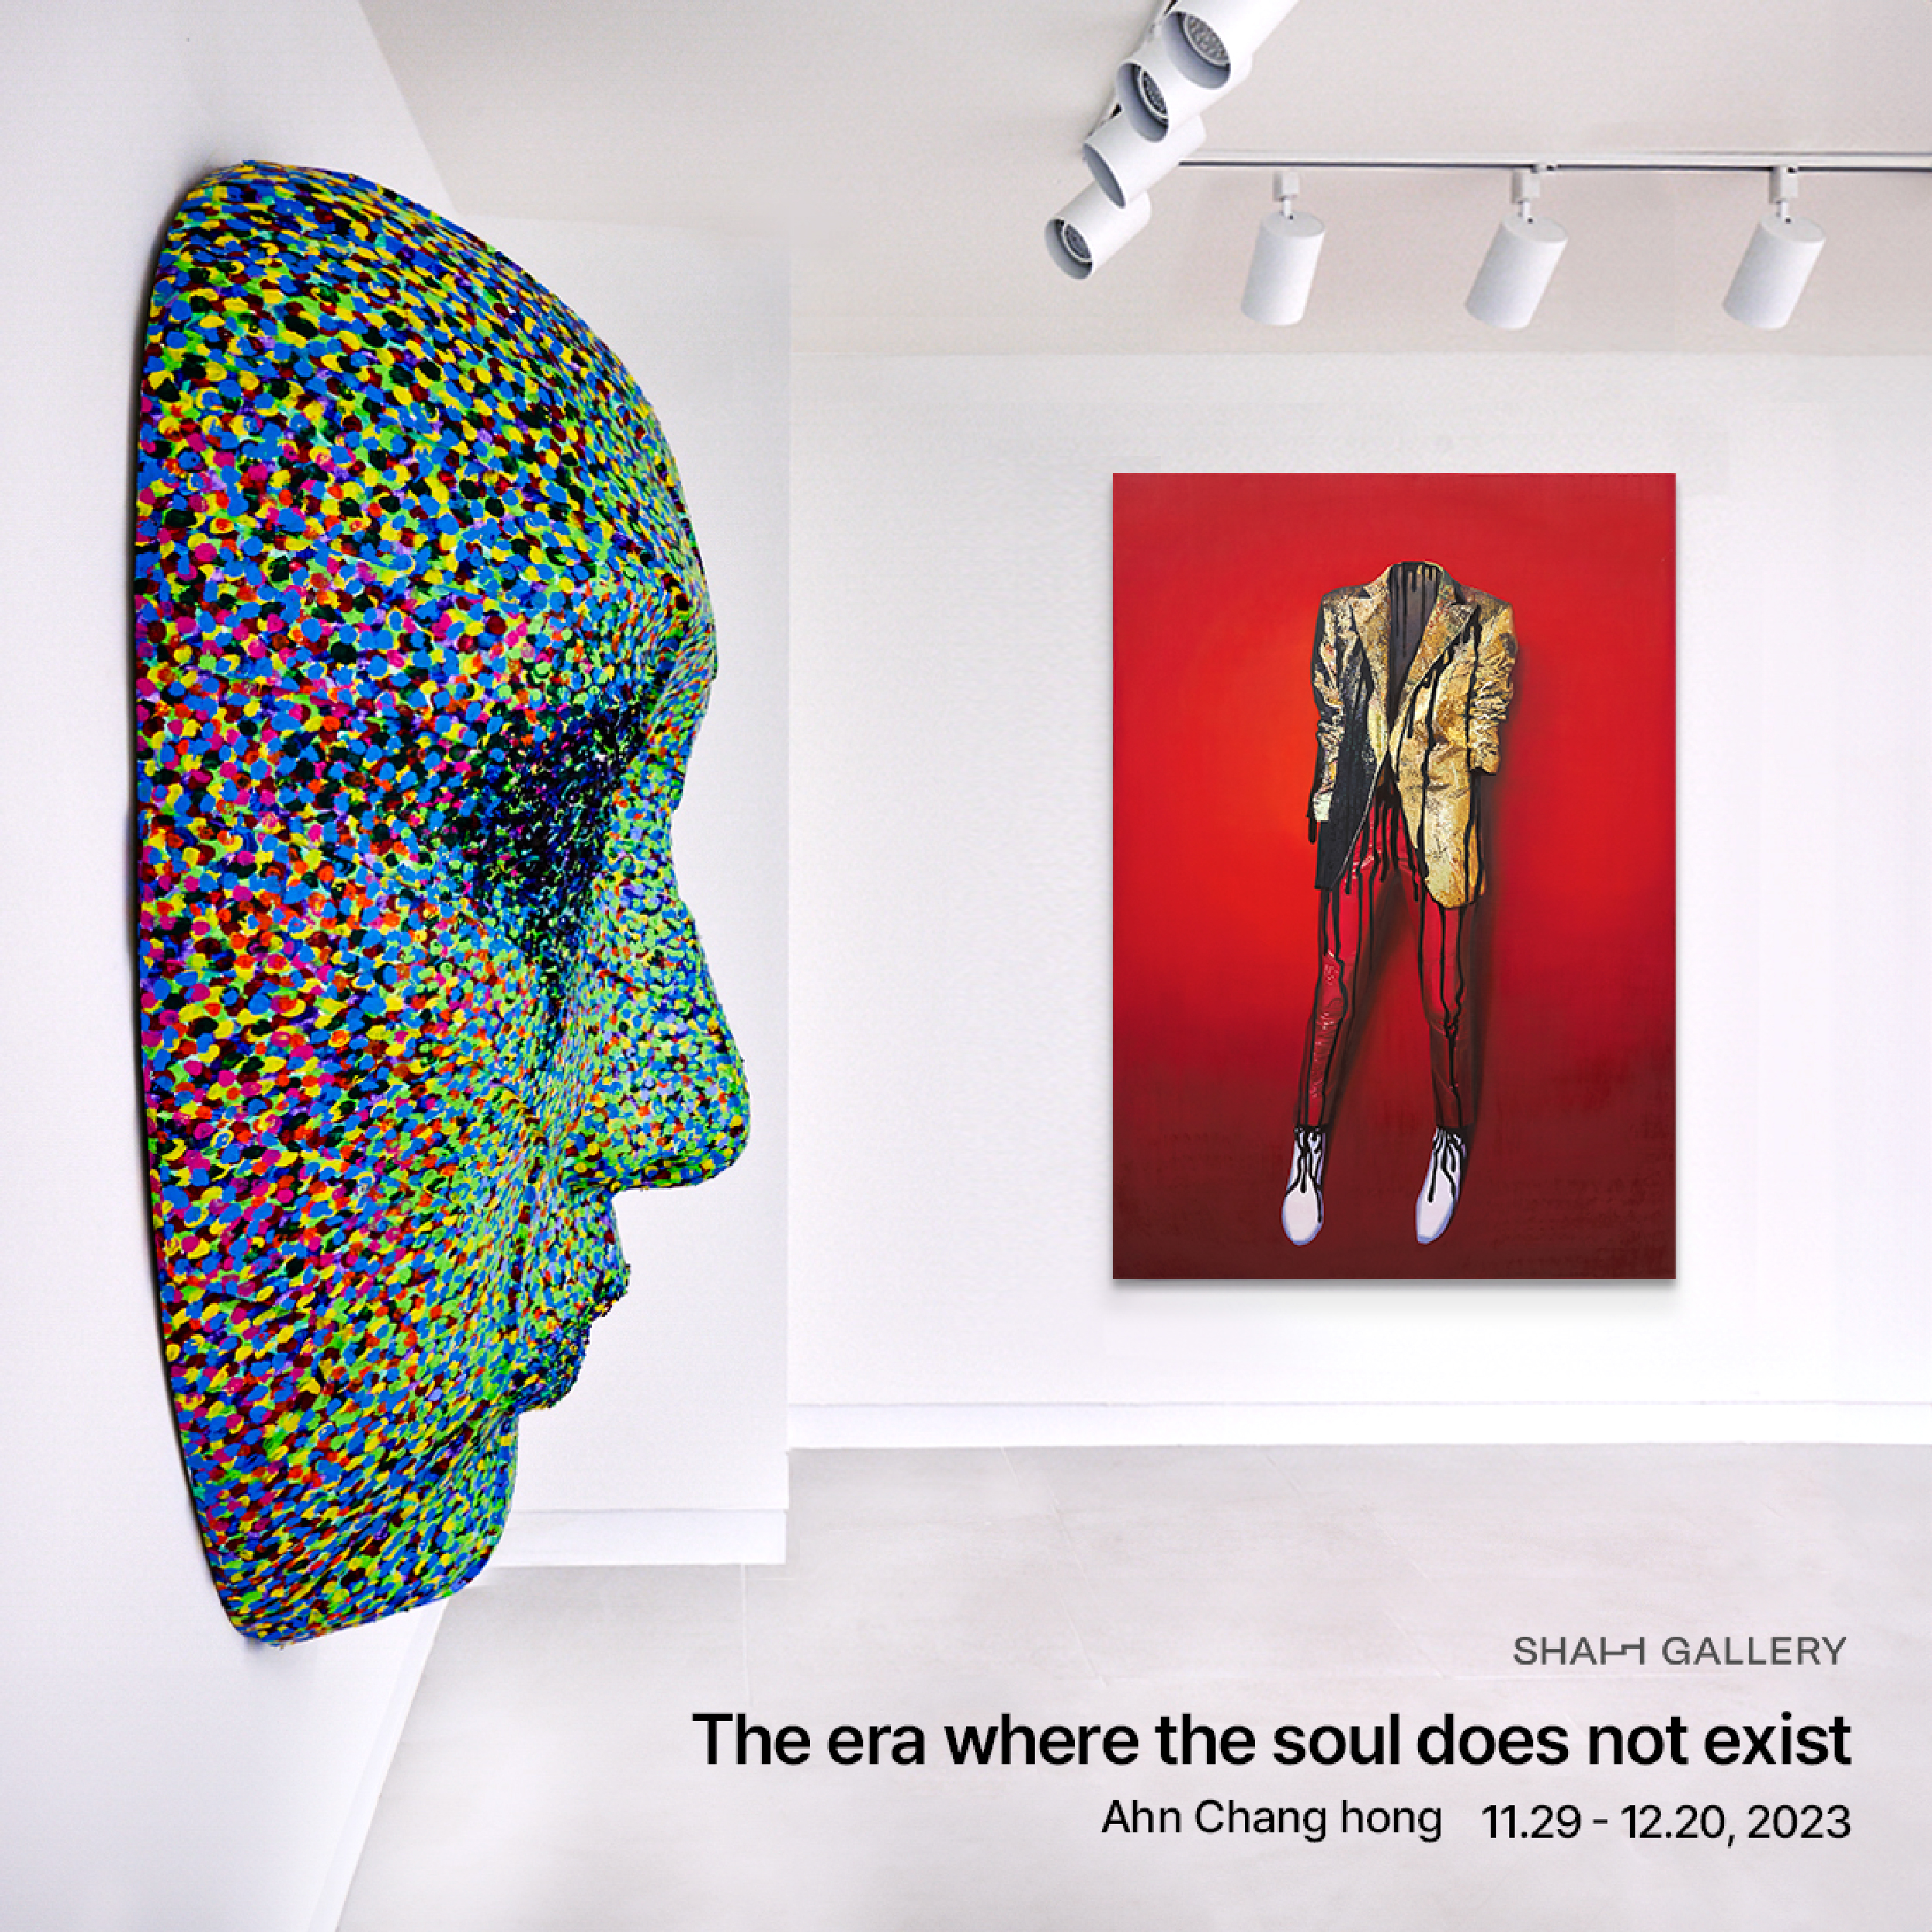 The era where the soul does not exist